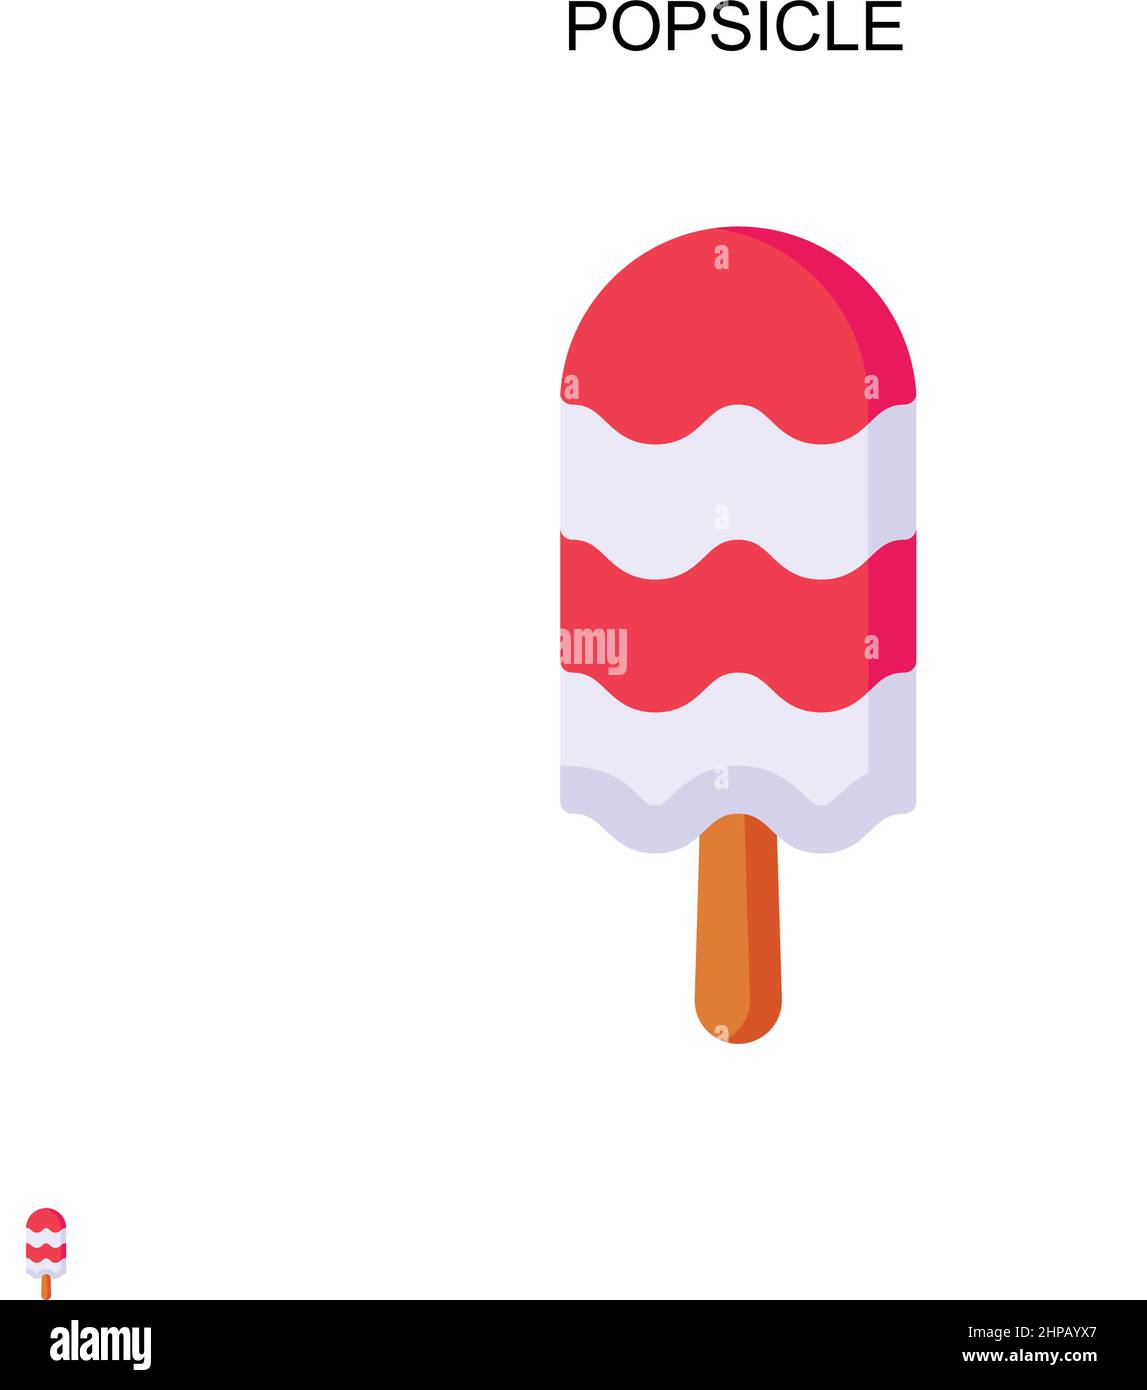 Popsicle Simple vector icon. Illustration symbol design template for web mobile UI element. Stock Vector